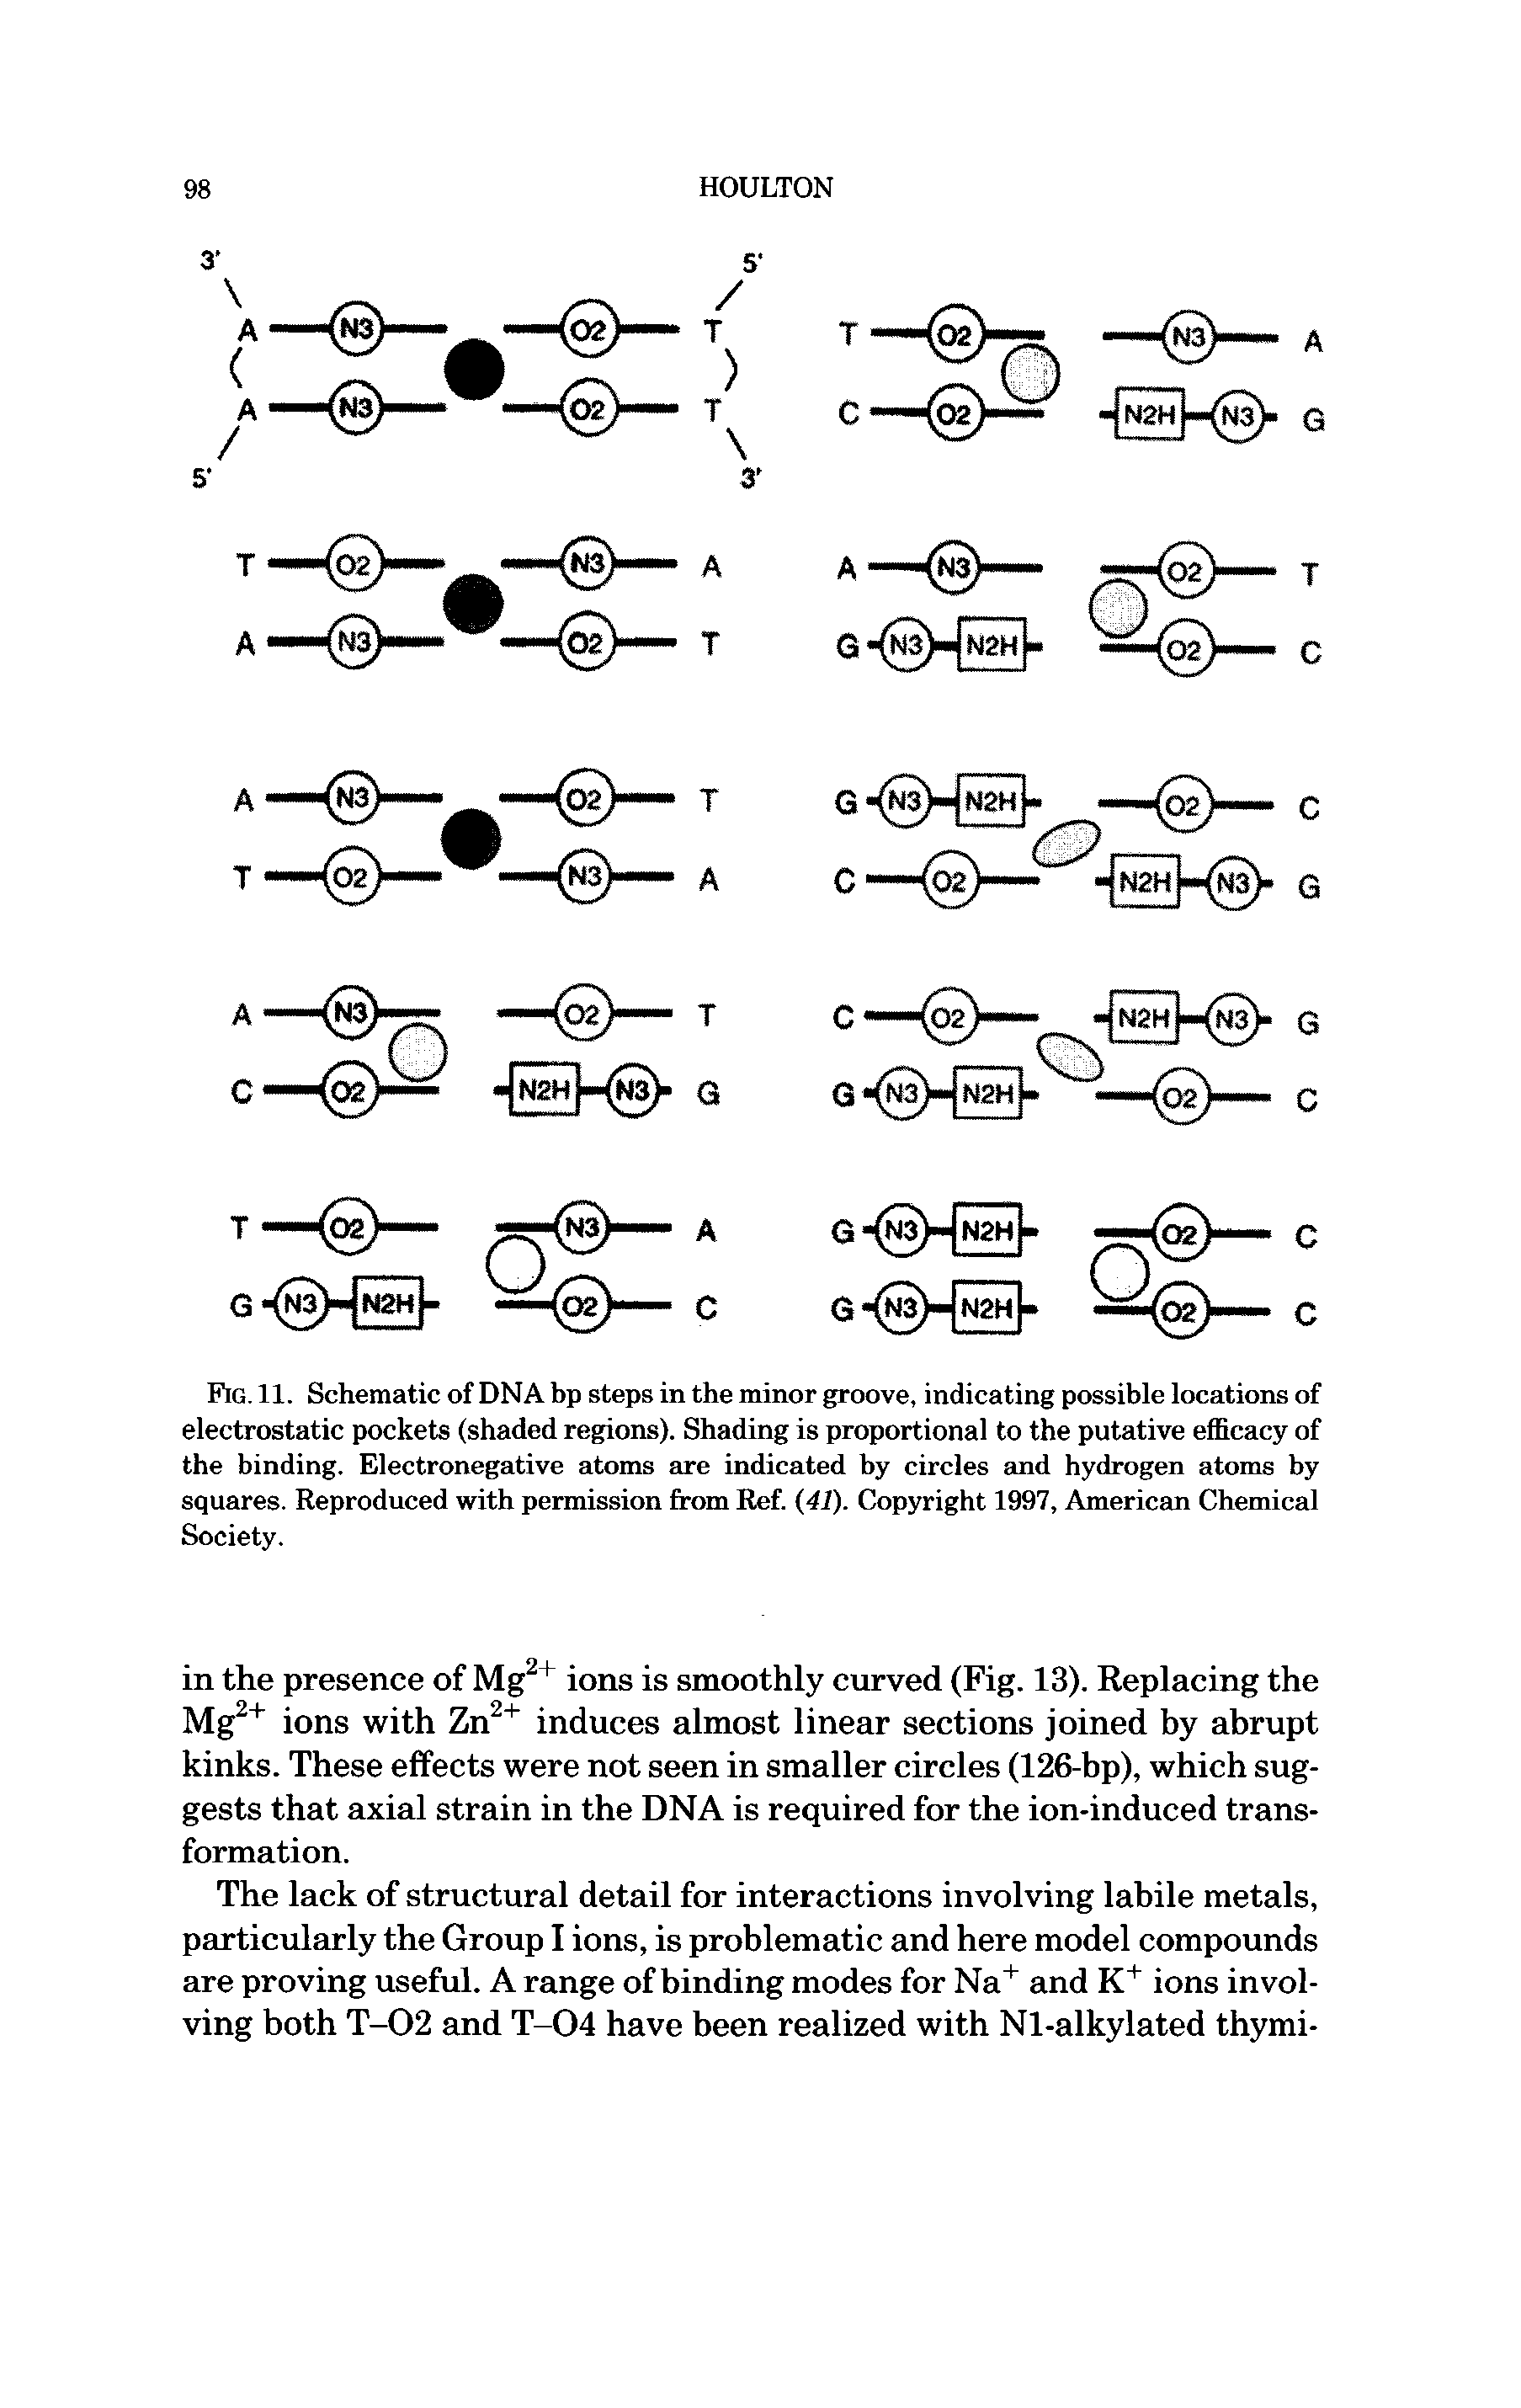 Fig. 11. Schematic of DNA bp steps in the minor groove, indicating possible locations of electrostatic pockets (shaded regions). Shading is proportional to the putative efficacy of the binding. Electronegative atoms are indicated by circles and hydrogen atoms by squares. Reproduced with permission from Ref. (41). Copyright 1997, American Chemical Society.